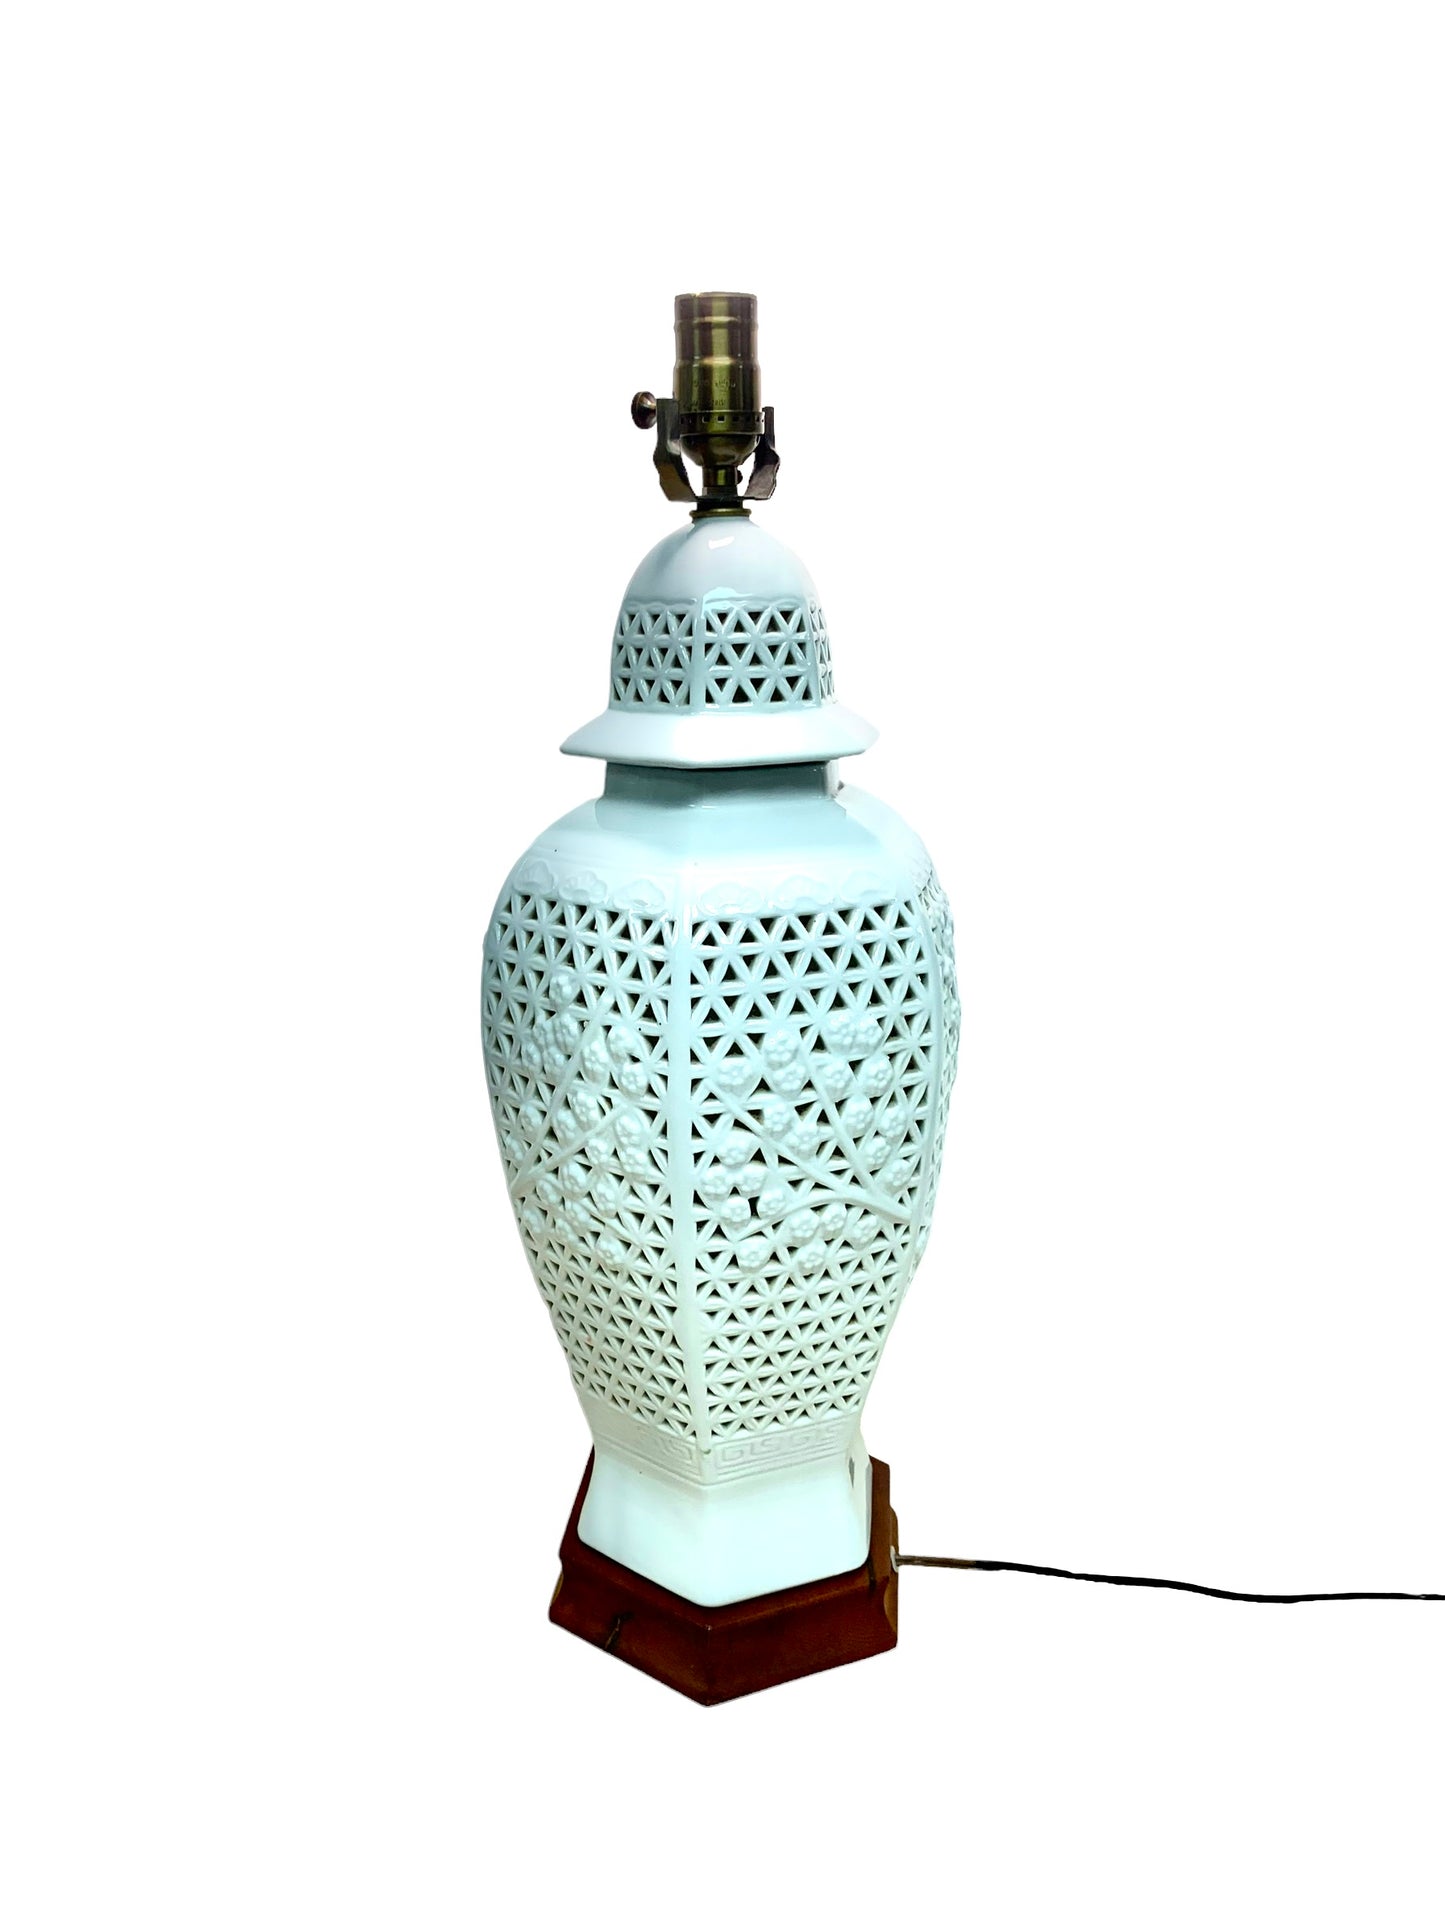 Lighting Vintage White Porcelain Reticulated Chine De Blanc Table Lamp